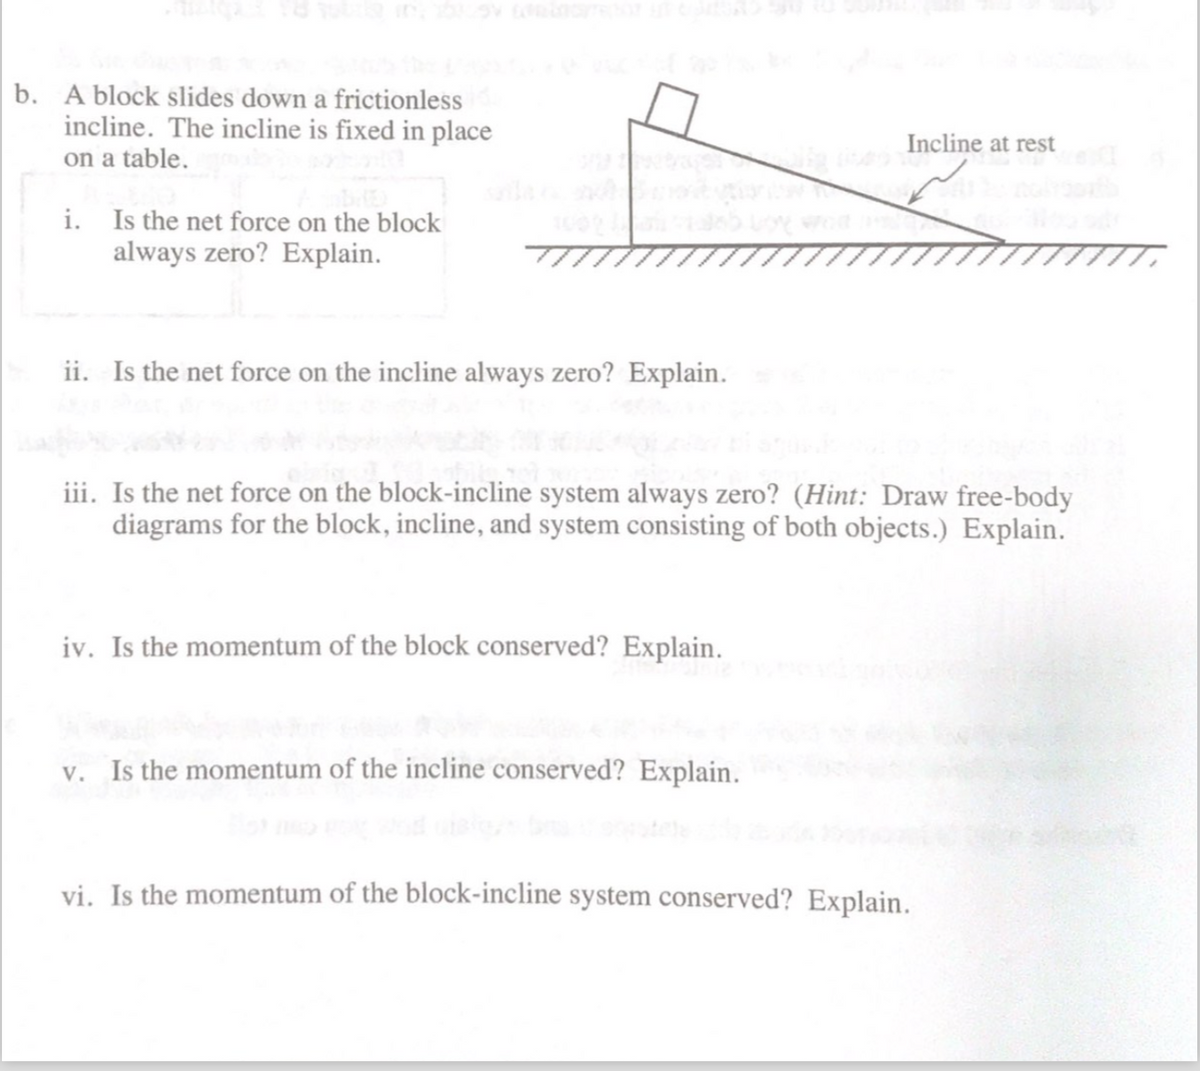 b. A block slides down a frictionless
incline. The incline is fixed in place
on a table.
Incline at rest
i. Is the net force on the block
always zero? Explain.
ii. Is the net force on the incline always zero? Explain.
iii. Is the net force on the block-incline system always zero? (Hint: Draw free-body
diagrams for the block, incline, and system consisting of both objects.) Explain.
iv. Is the momentum of the block conserved? Explain.
v. Is the momentum of the incline conserved? Explain.
vi. Is the momentum of the block-incline system conserved? Explain.
